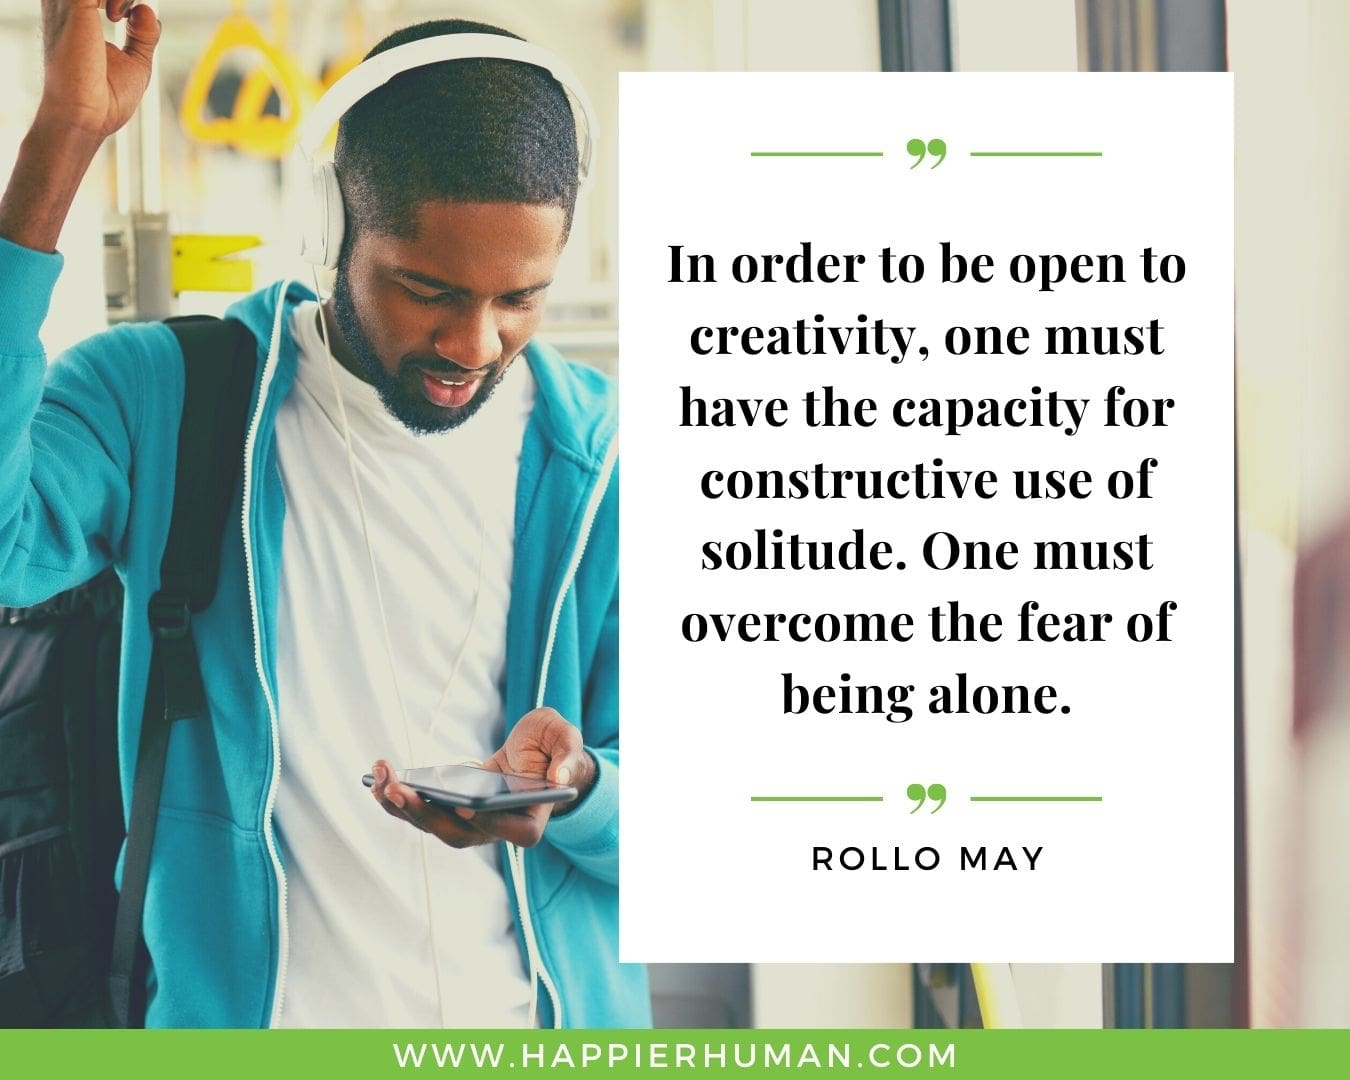 Introvert Quotes - “In order to be open to creativity, one must have the capacity for constructive use of solitude. One must overcome the fear of being alone.” – Rollo May